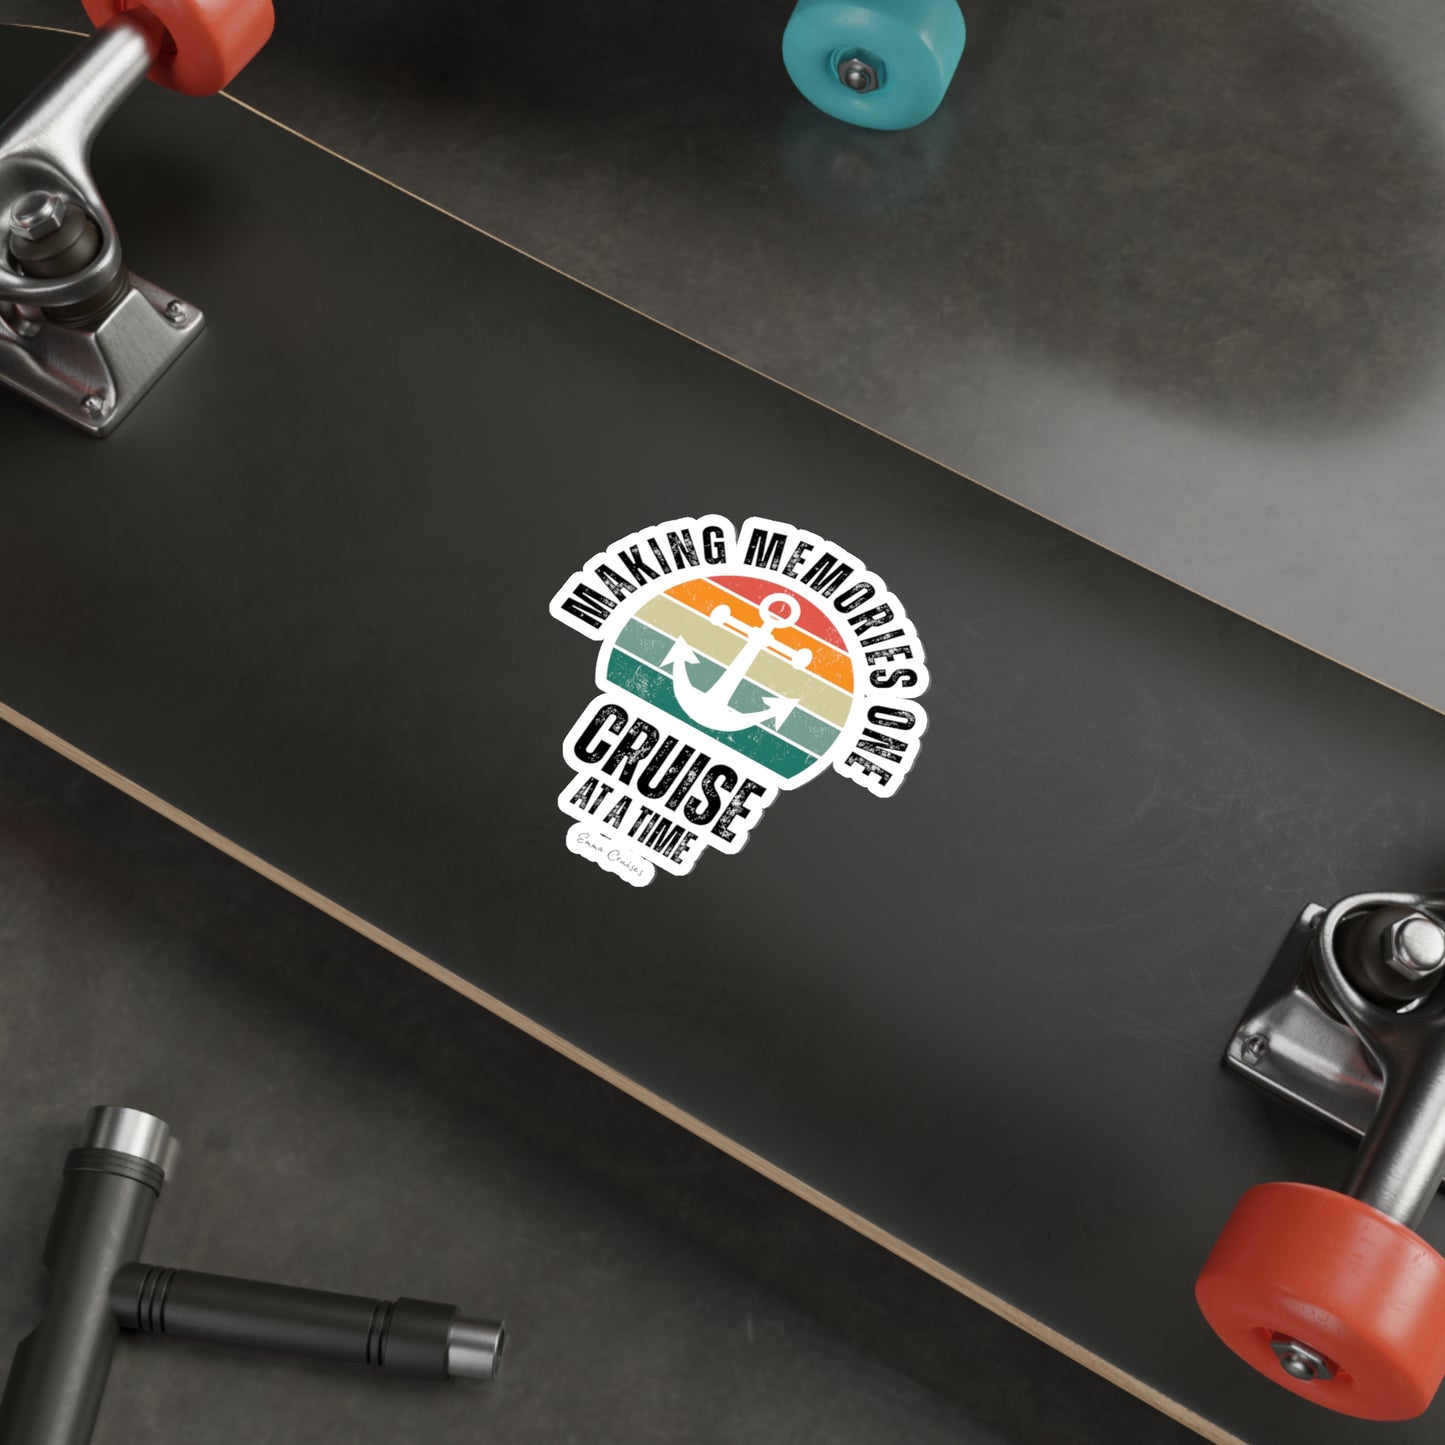 Making Memories One Cruise at a Time - Die-Cut Sticker